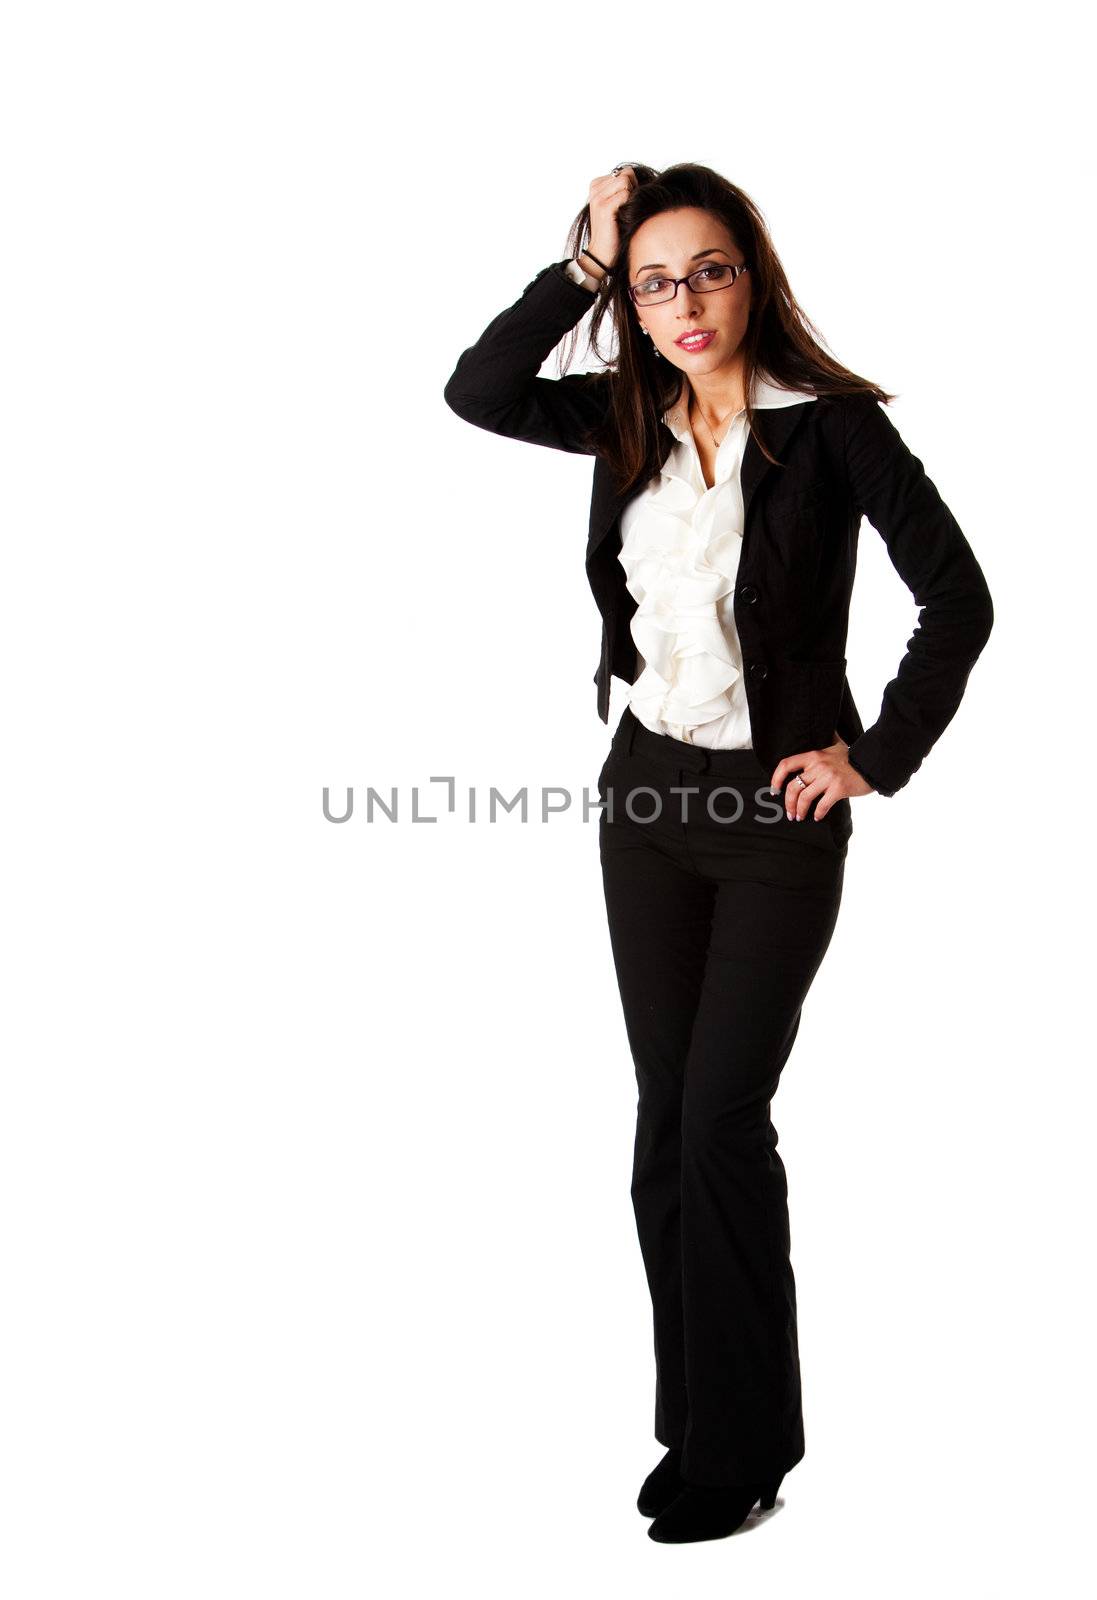 Beautiful stressed burned-out successful Caucasian Hispanic entrepreneur business woman standing, wearing black suit, white ruffled shirt and glasses, hand pulling hair, isolated.